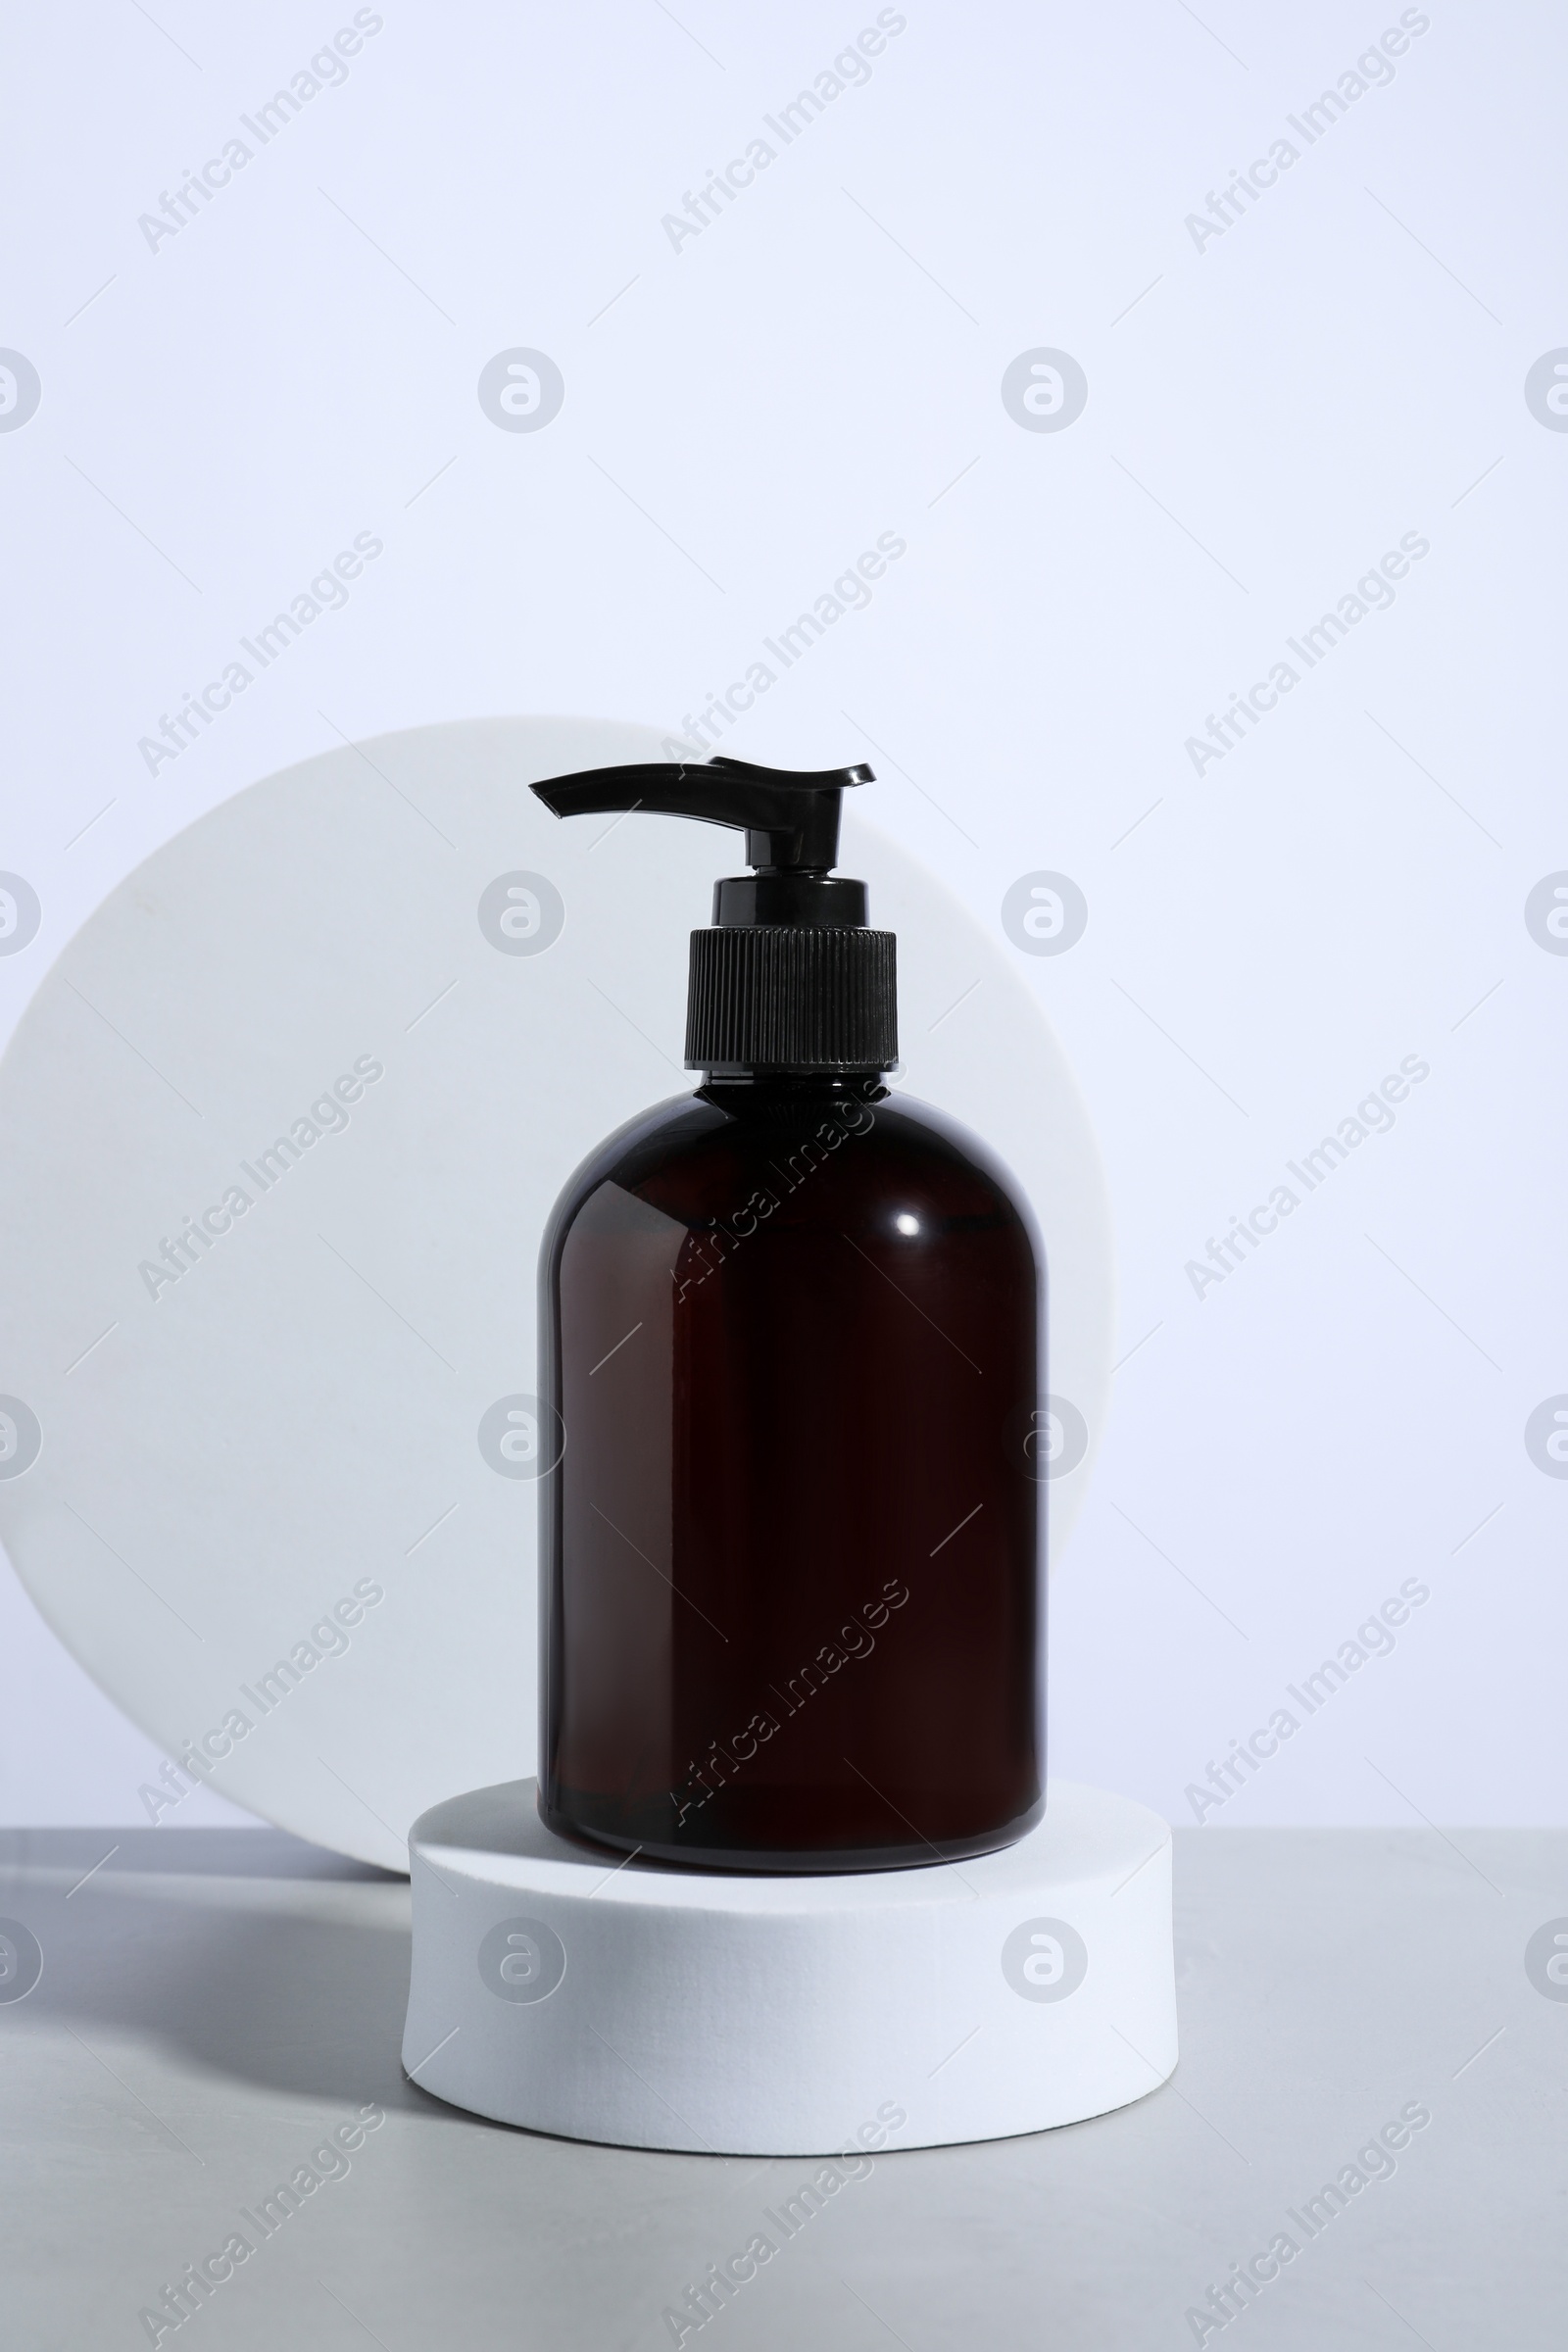 Photo of Bottle of cosmetic product and podiums on light grey table against white background